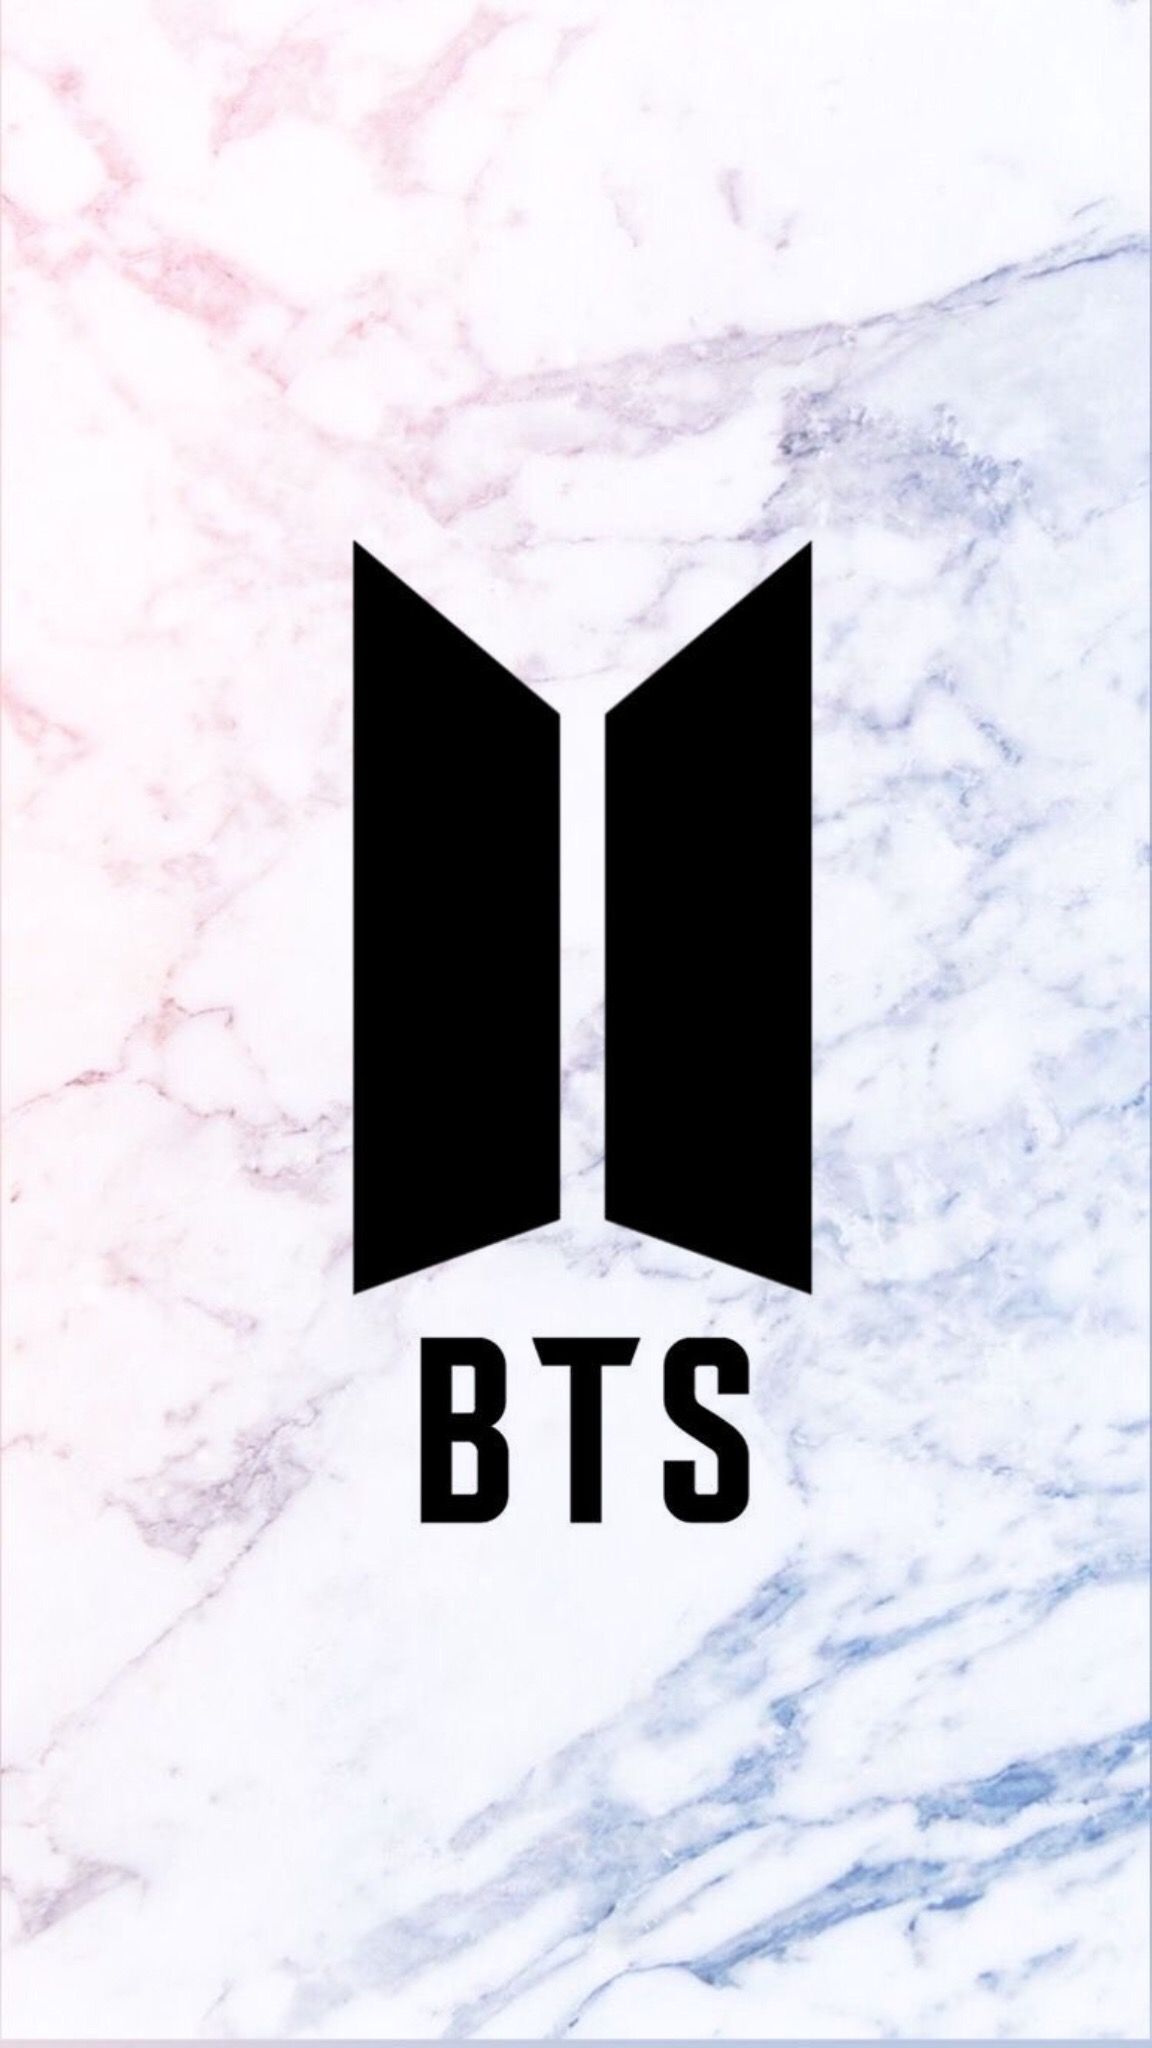 Bts proof logo copy and paste